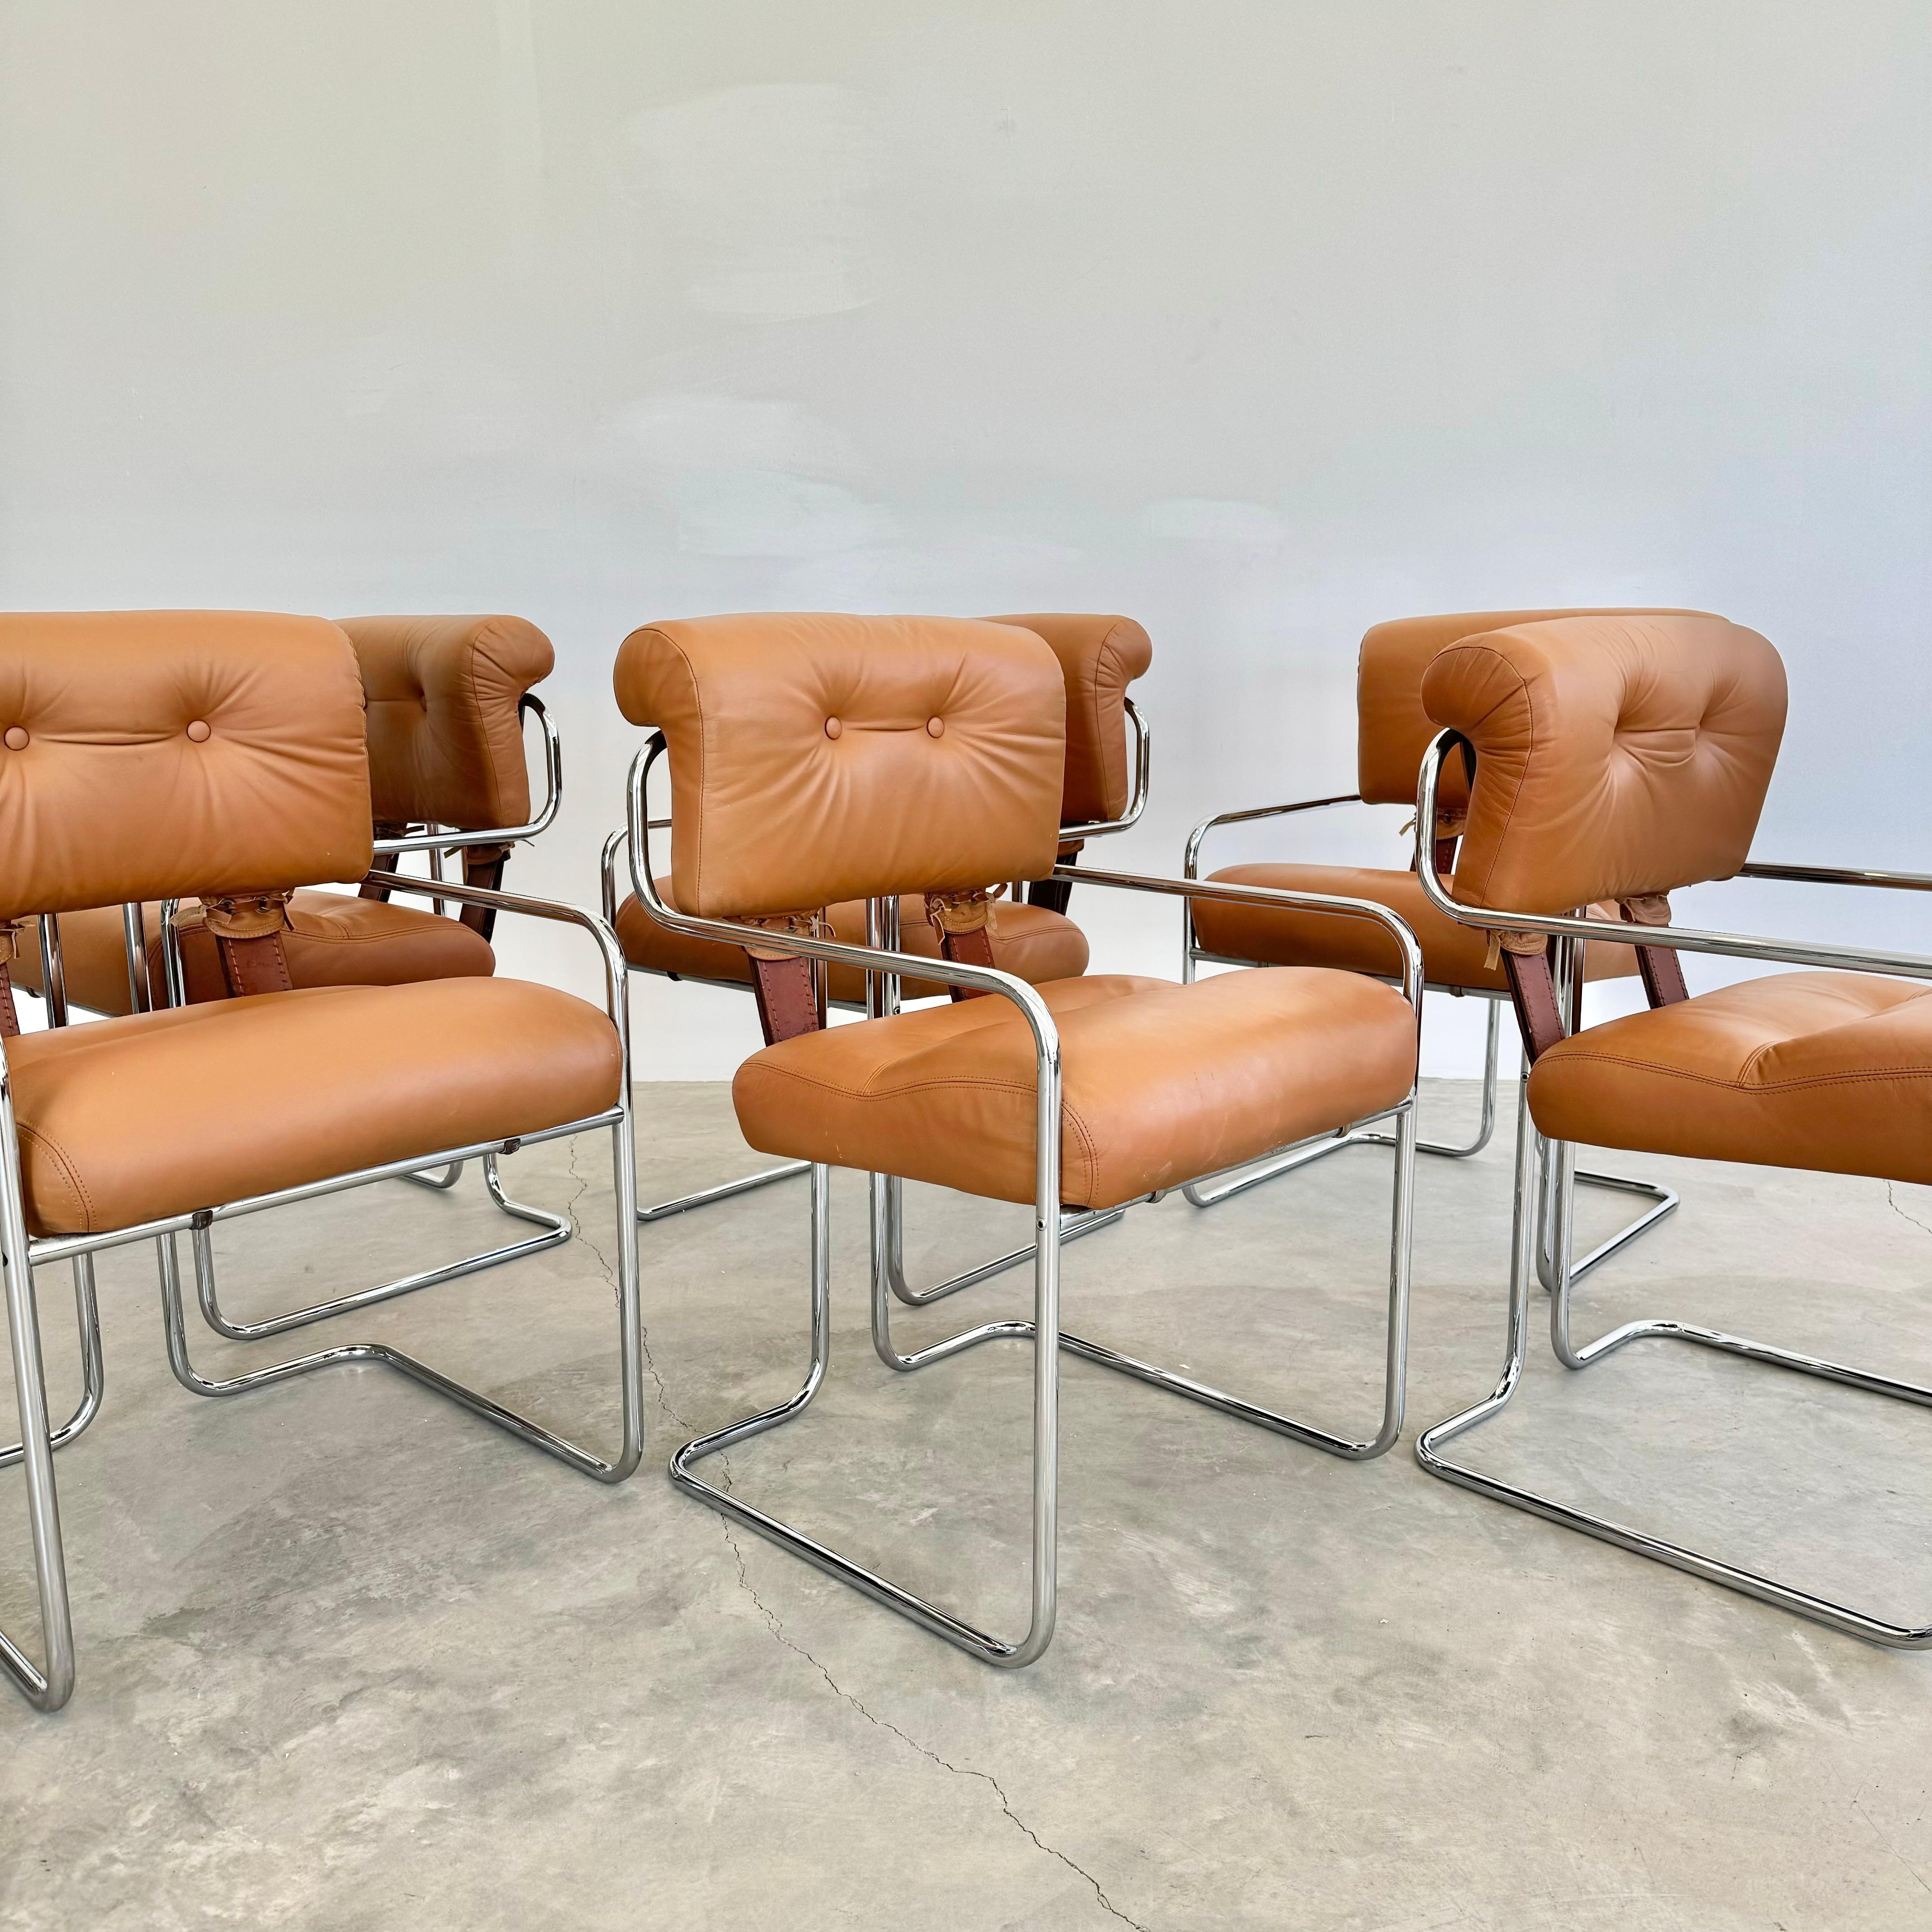 Chrome Set of 6 'Tucroma' Chairs in Tan by Guido Faleschini, 1970s Italy For Sale